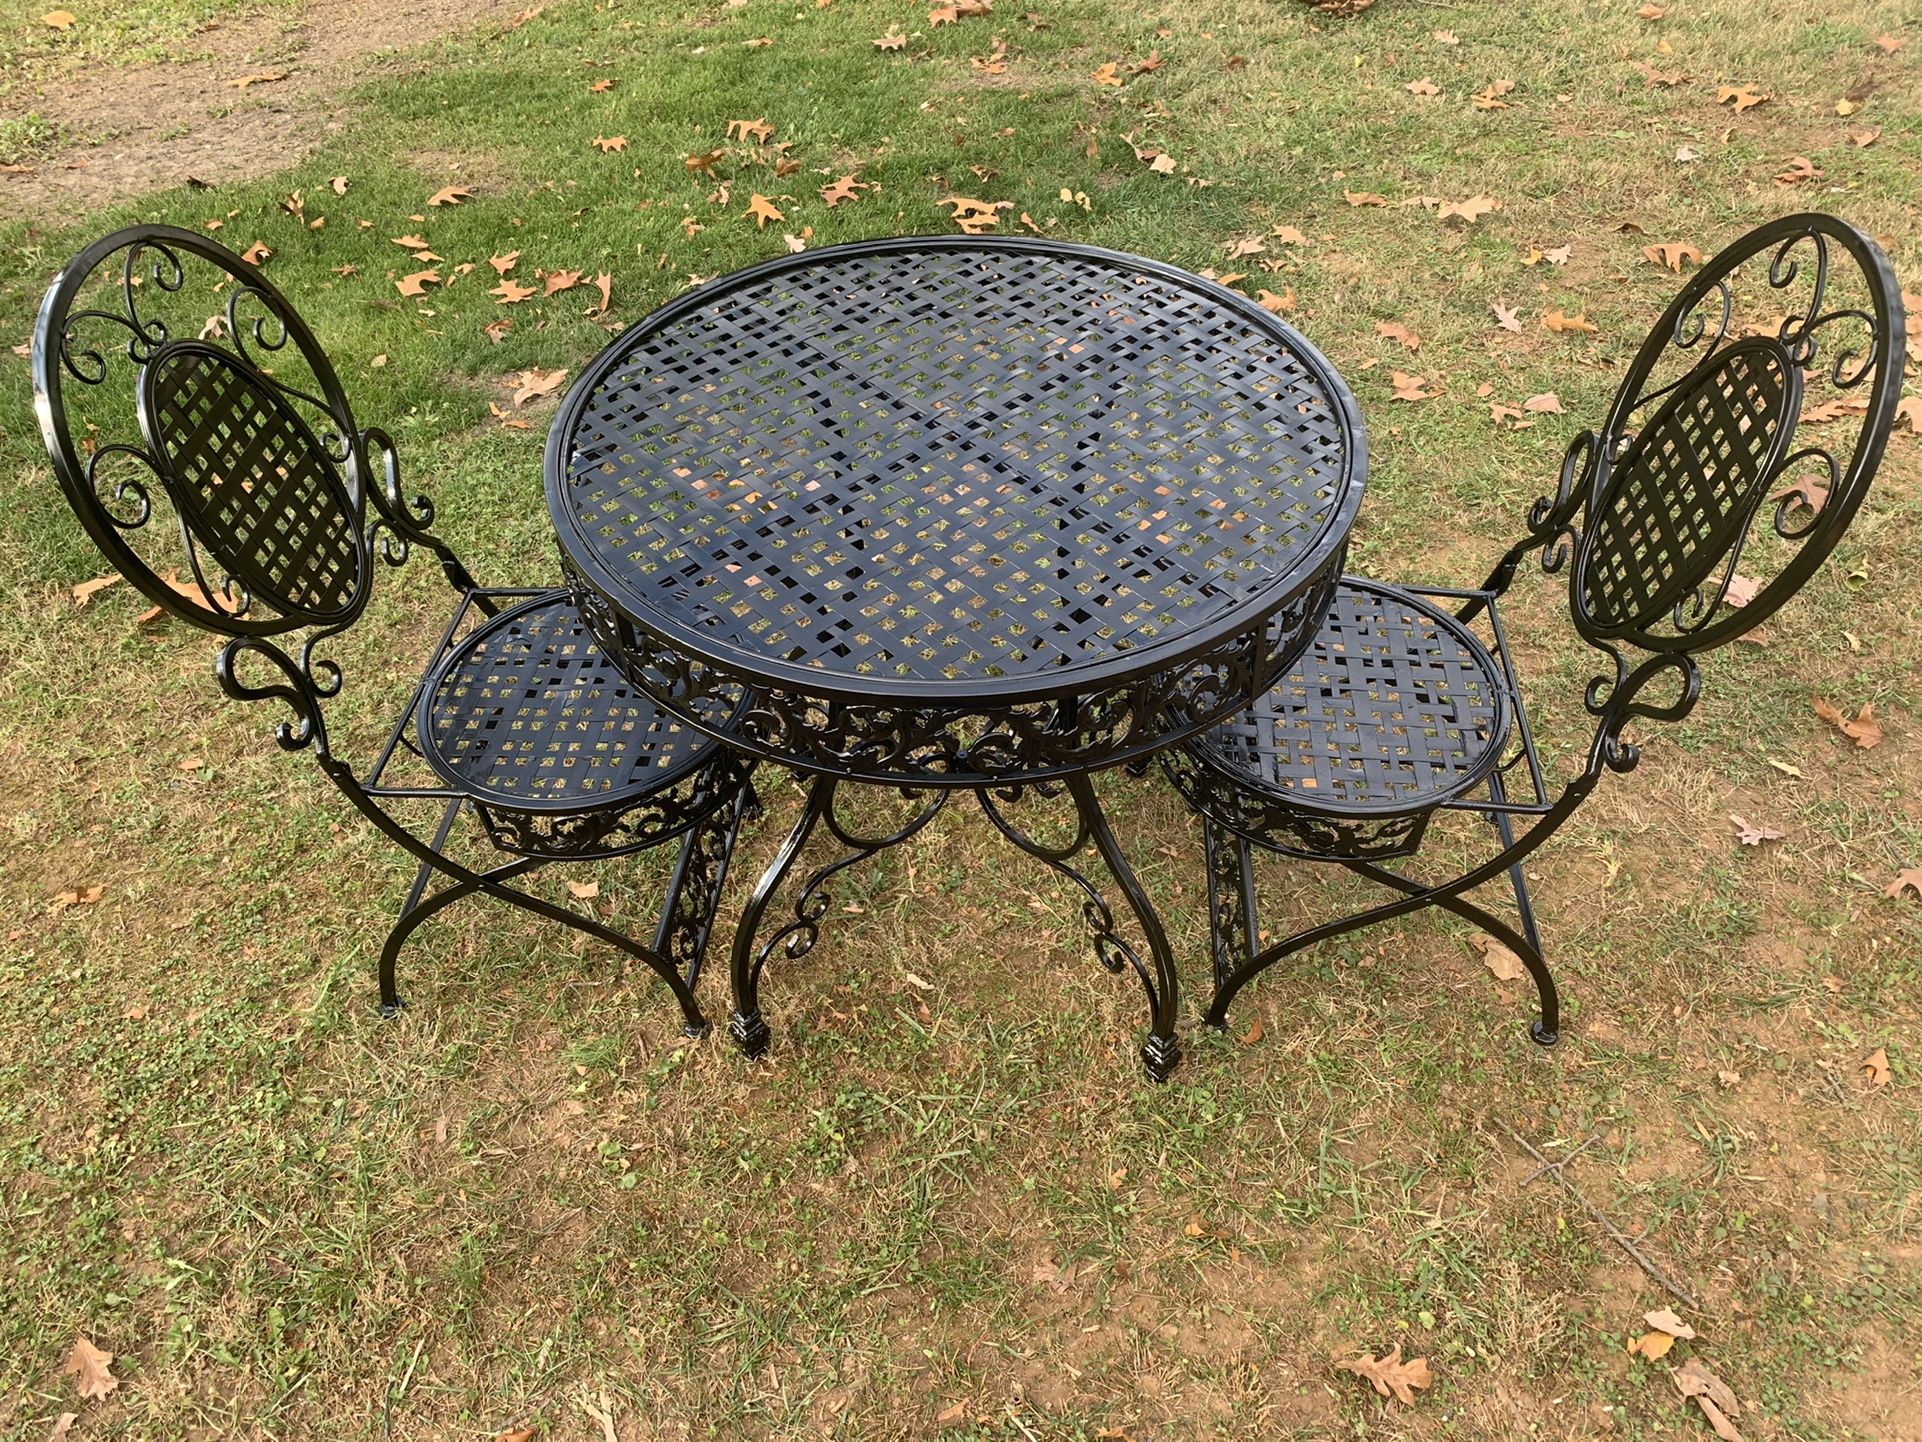 Gorgeous iron bistro set decorative table and chairs EXCELLENT CONDITION!!